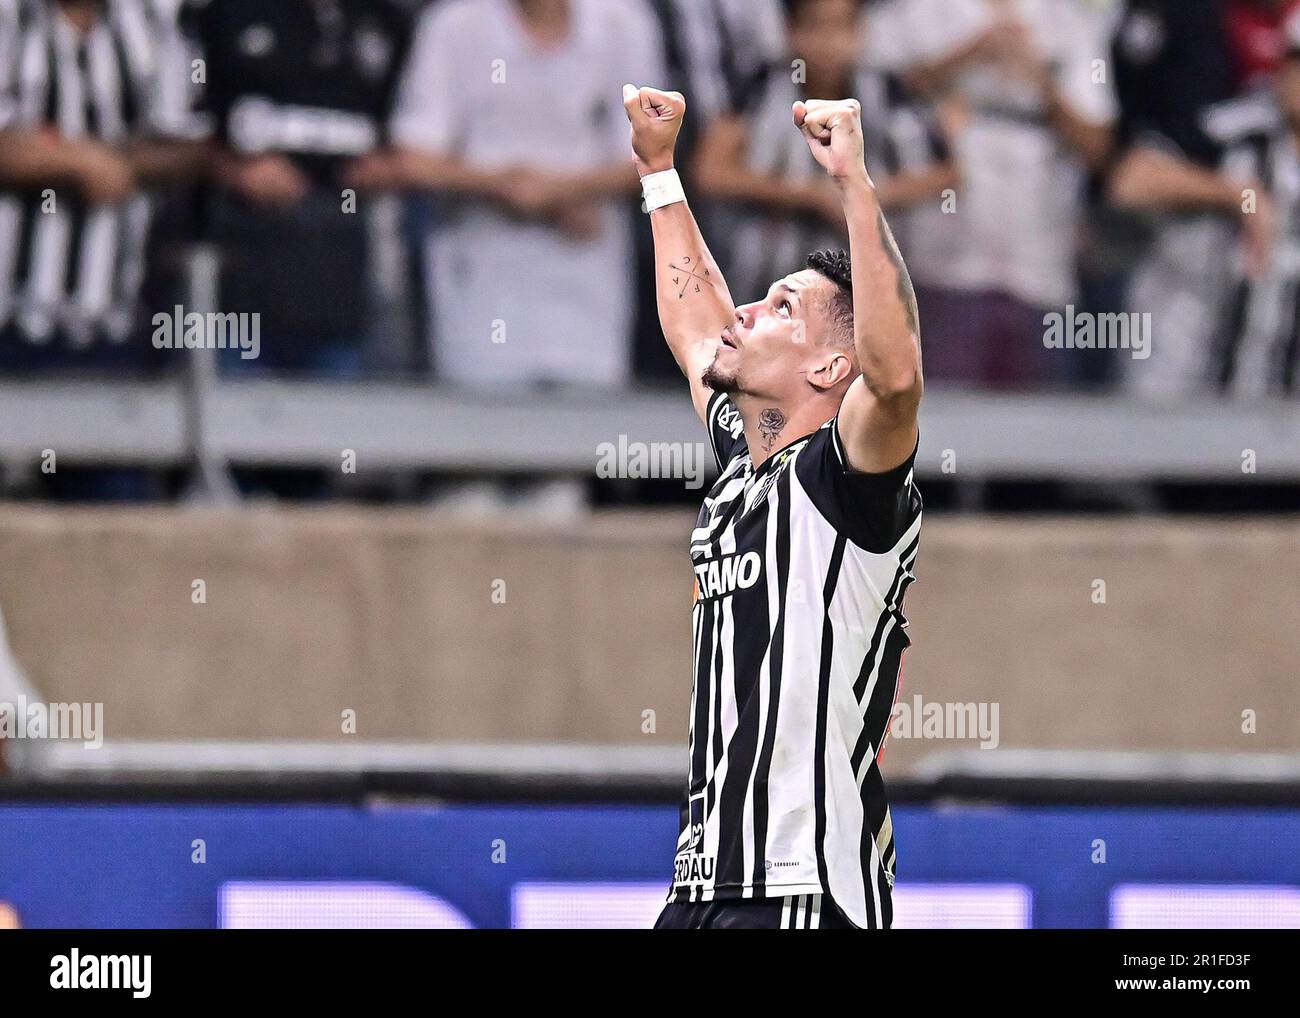 Belo Horizonte, Brazil. 13th May, 2023. Paulinho of Atletico Mineiro, celebrates after scores his goal during the match between Atletico Mineiro and Internacional, for the Brazilian Serie A 2023, at Mineirao Stadium, in Belo Horizonte on May 13. Photo: Gledston Tavares/DiaEsportivo/Alamy Live News Credit: DiaEsportivo/Alamy Live News Stock Photo